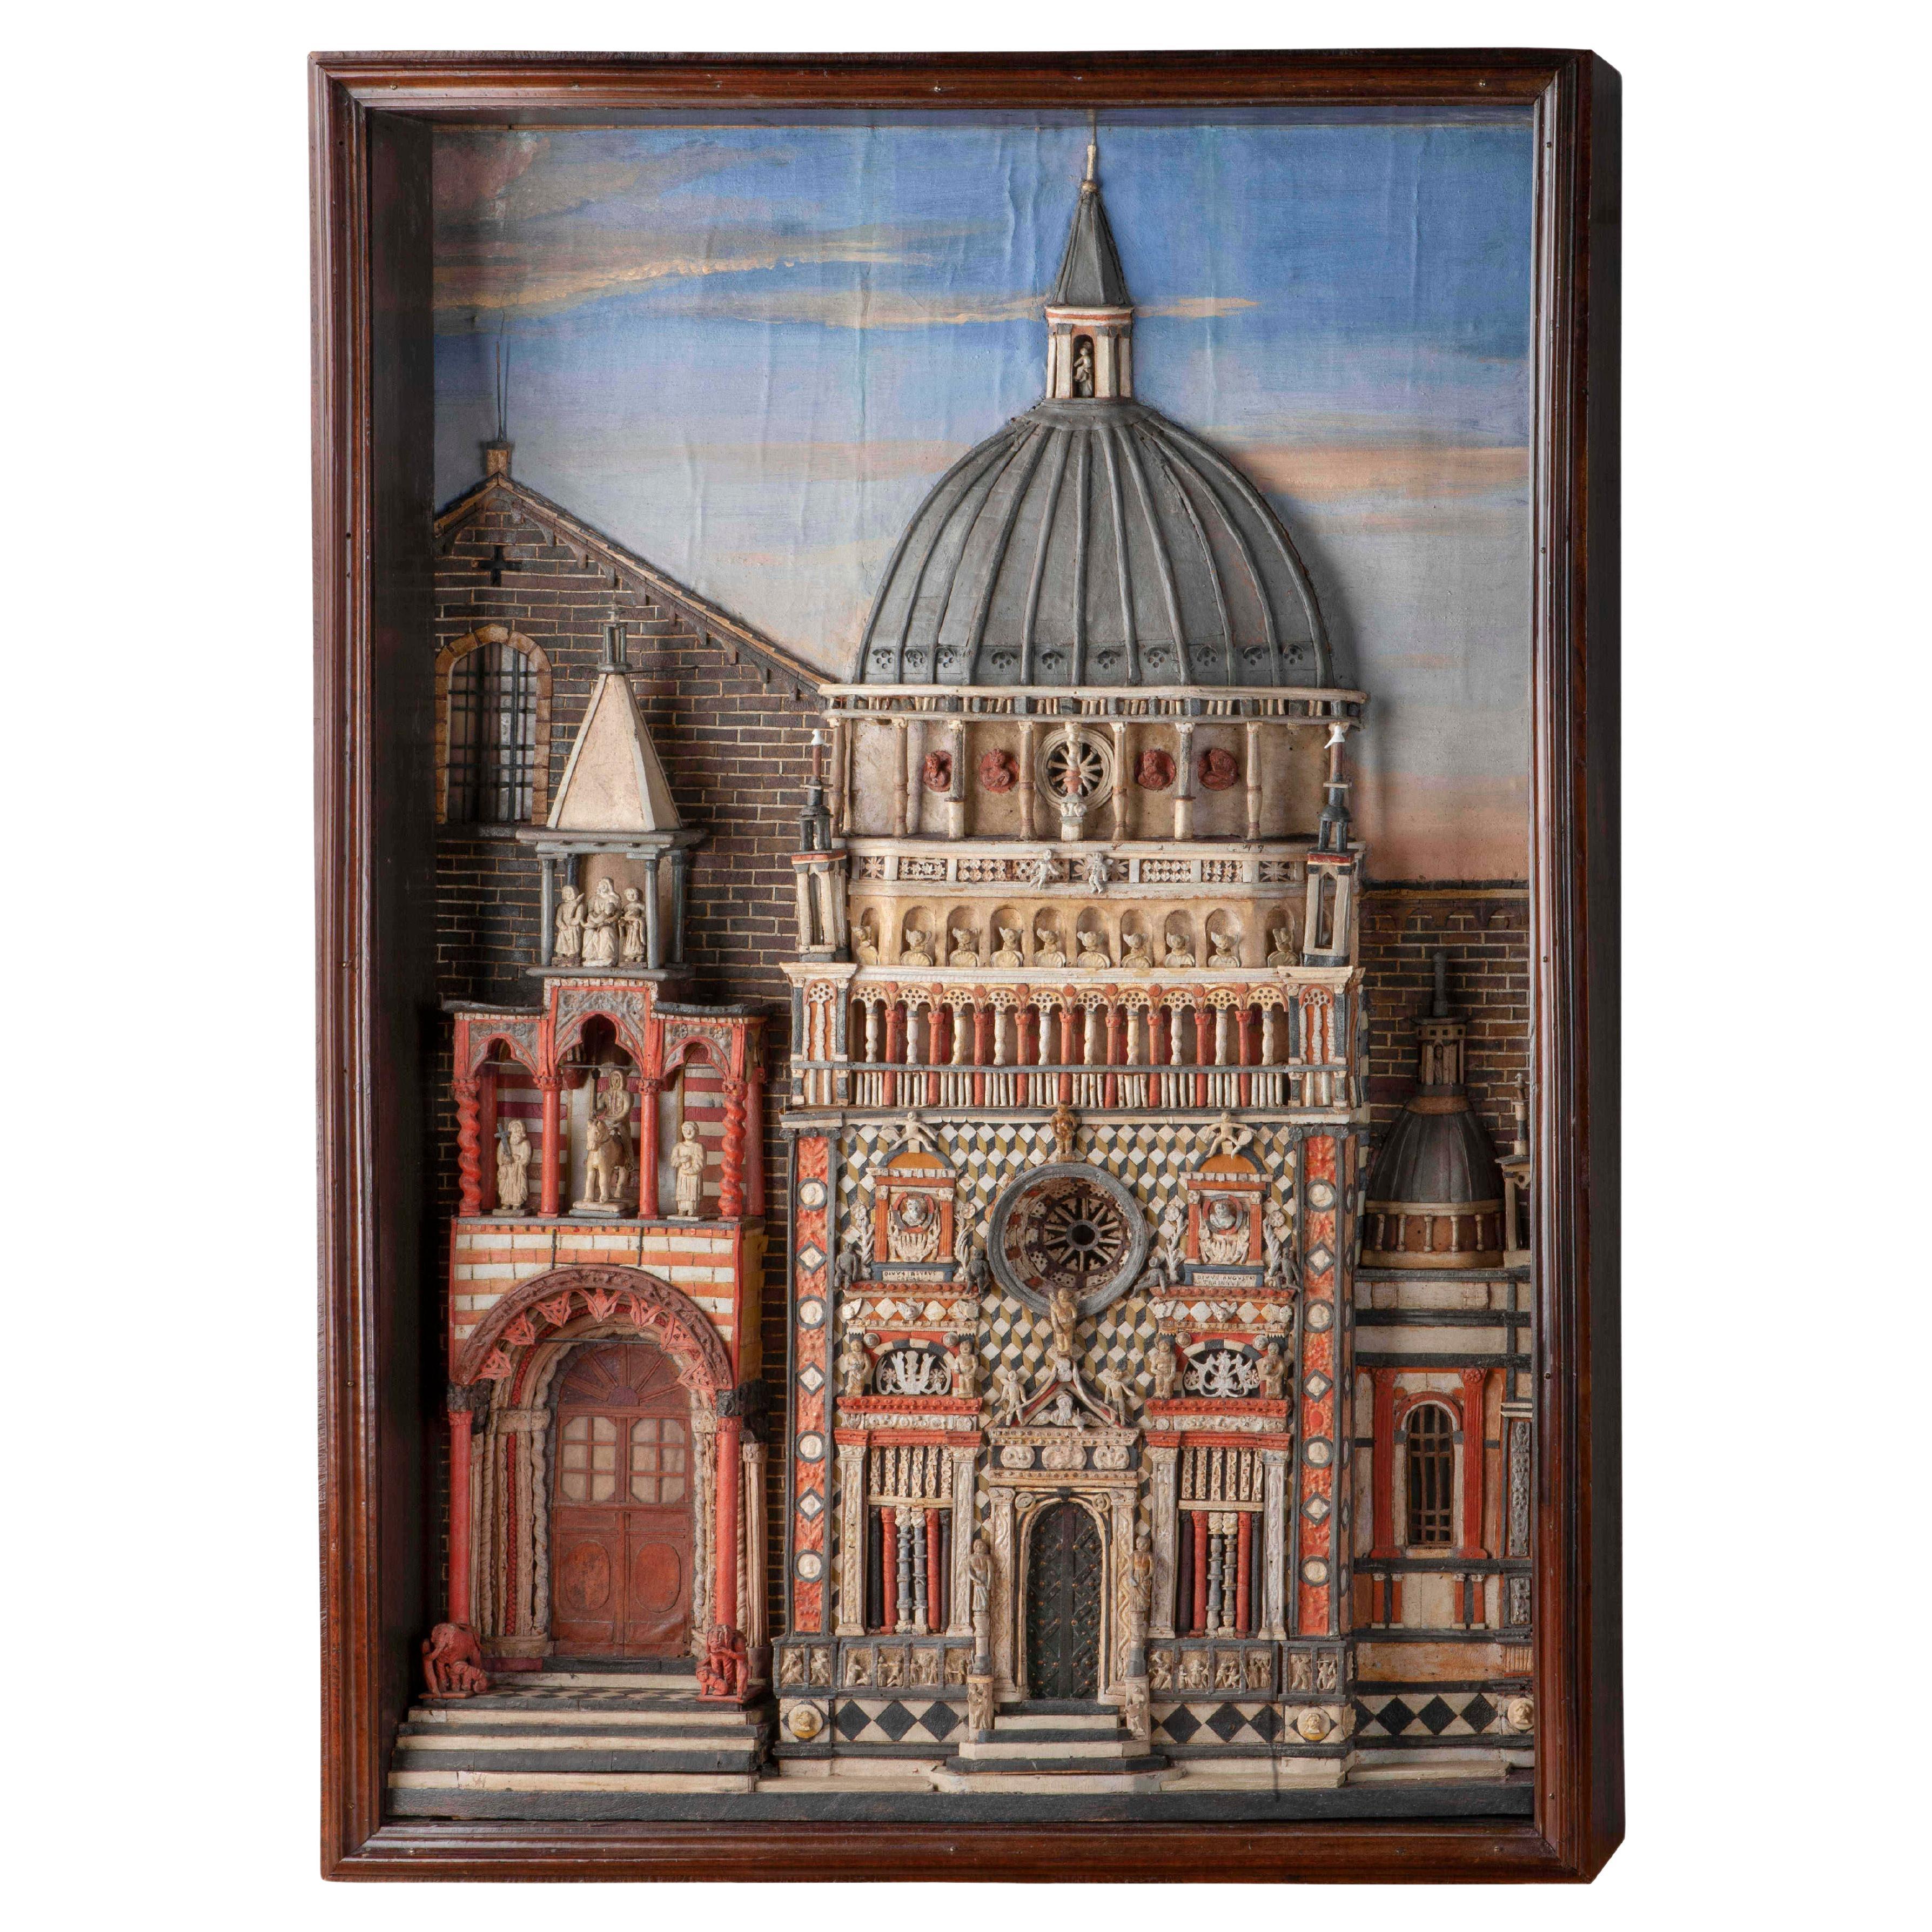 The Colleoni Chapel - Model made of wood, paper, tablet and various materials.